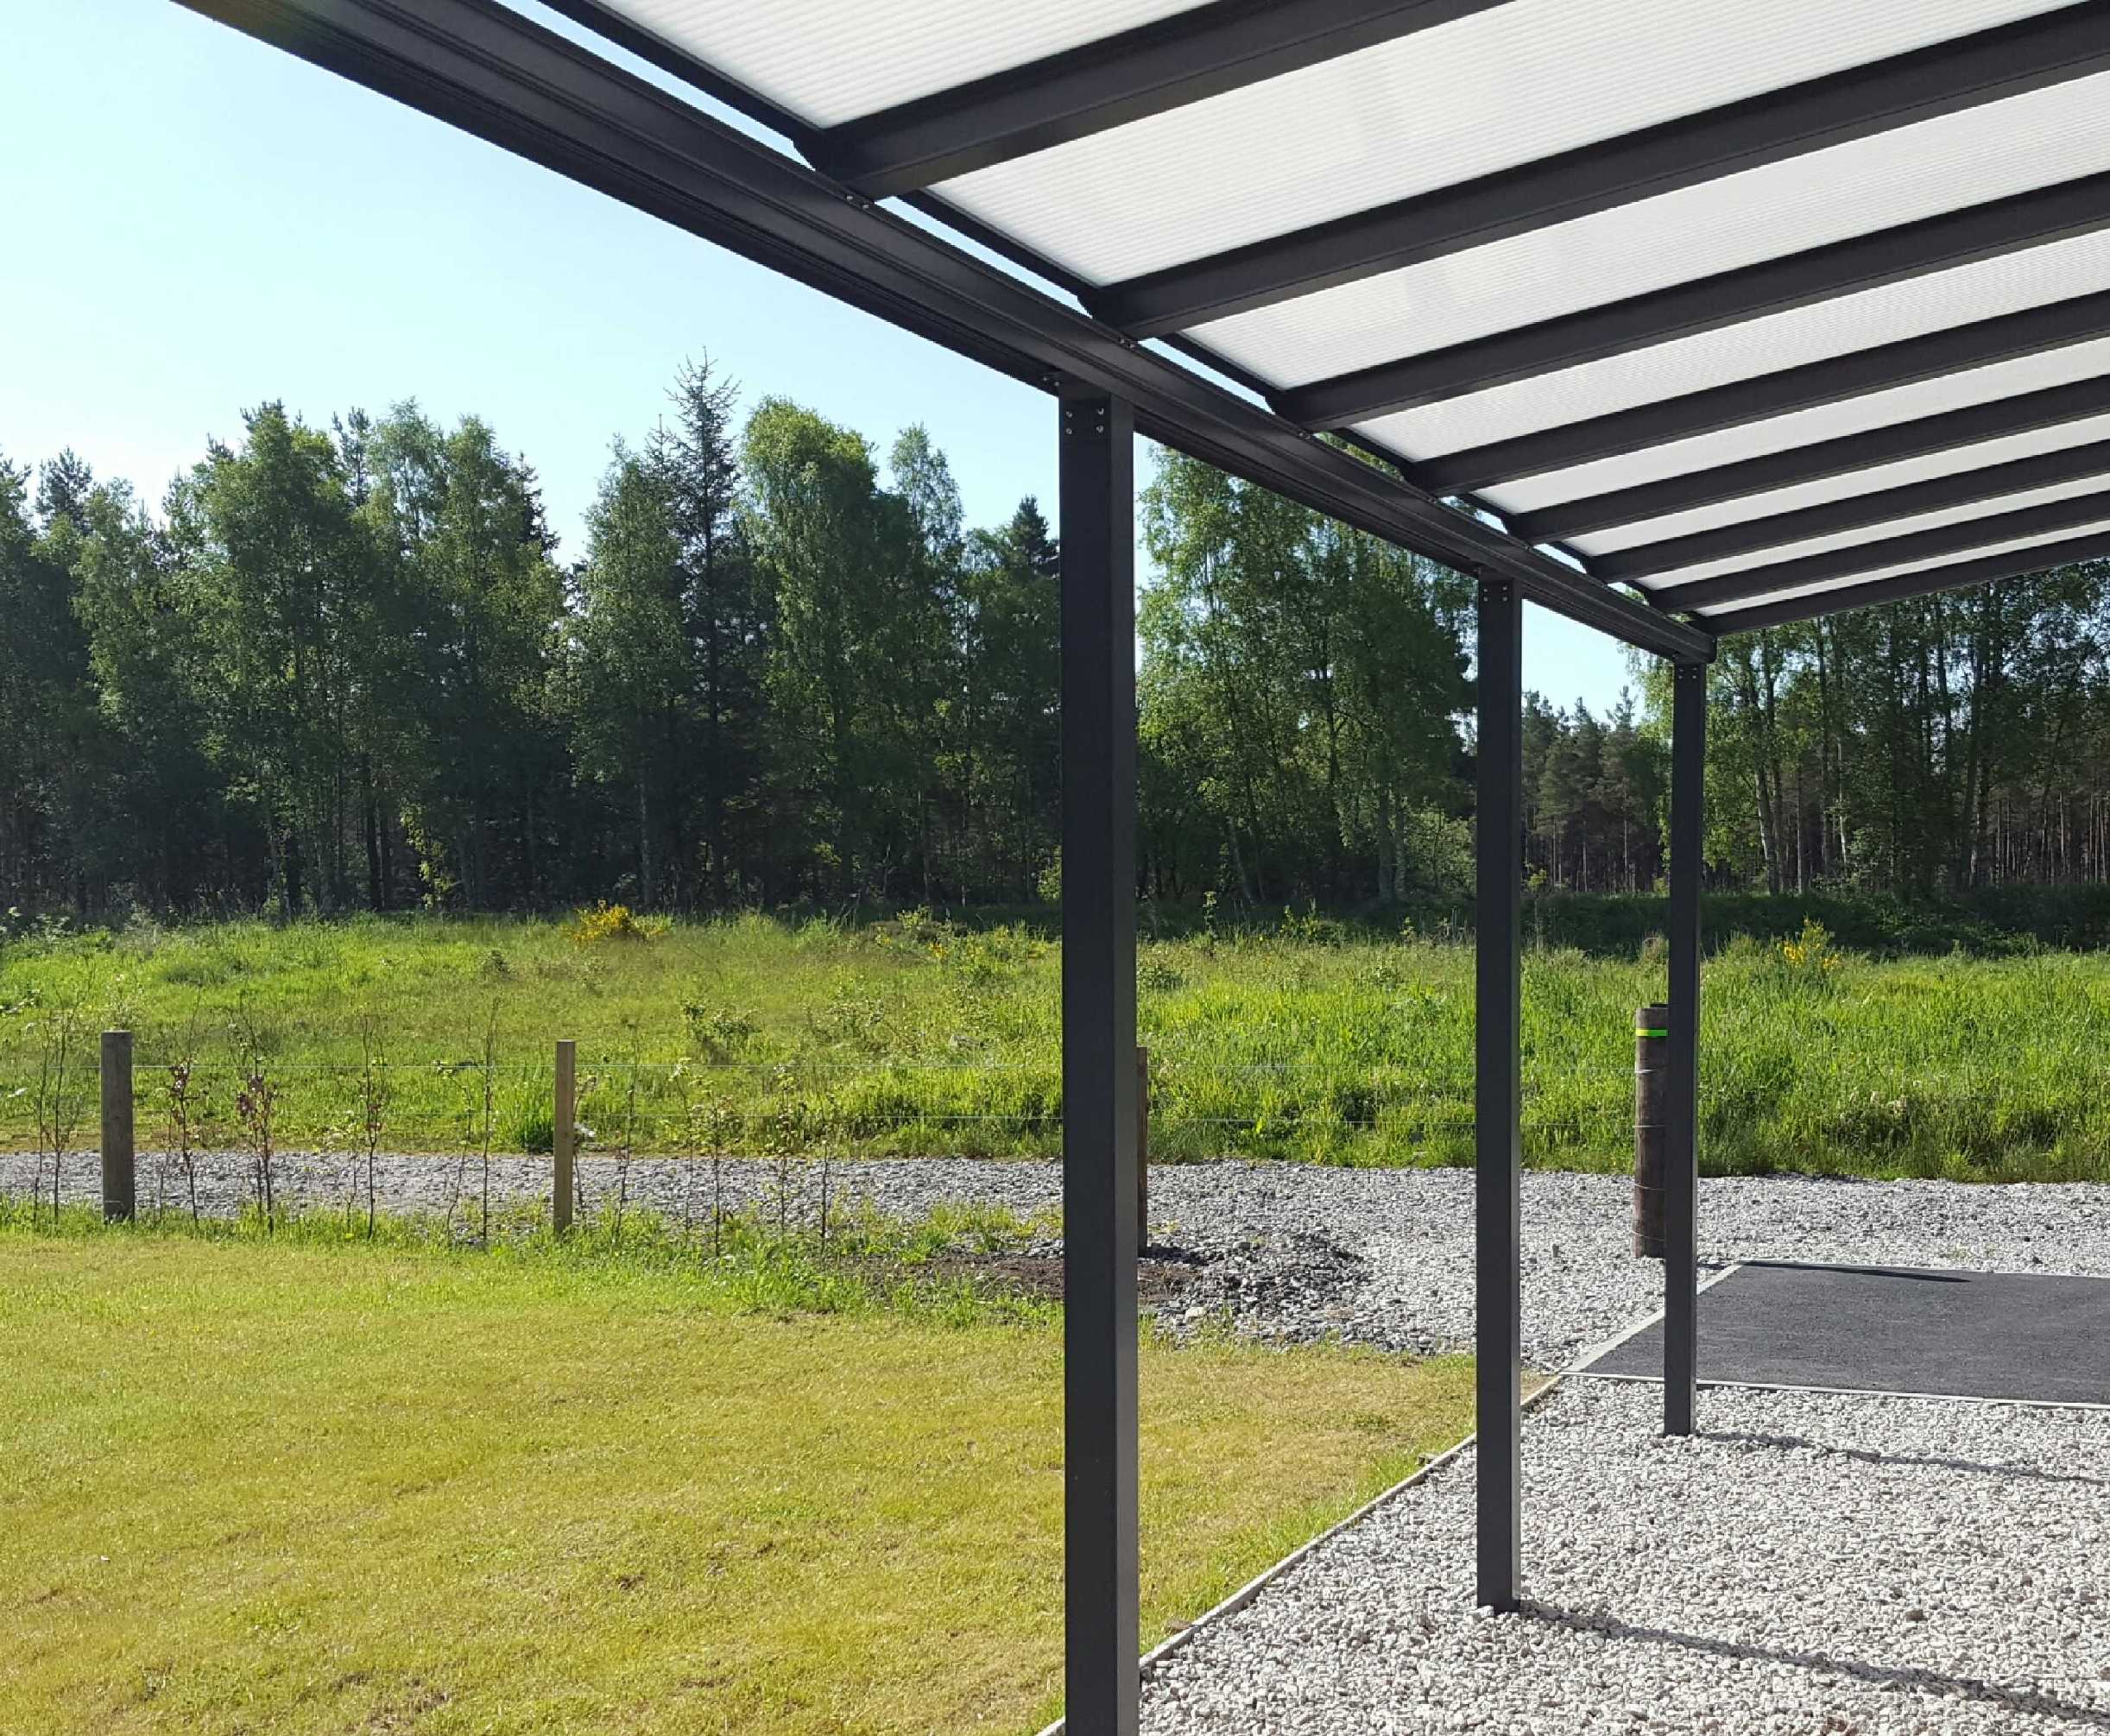 Omega Smart Lean-To Canopy, Anthracite Grey, 6mm Glass Clear Plate Polycarbonate Glazing - 6.3m (W) x 2.5m (P), (4) Supporting Posts